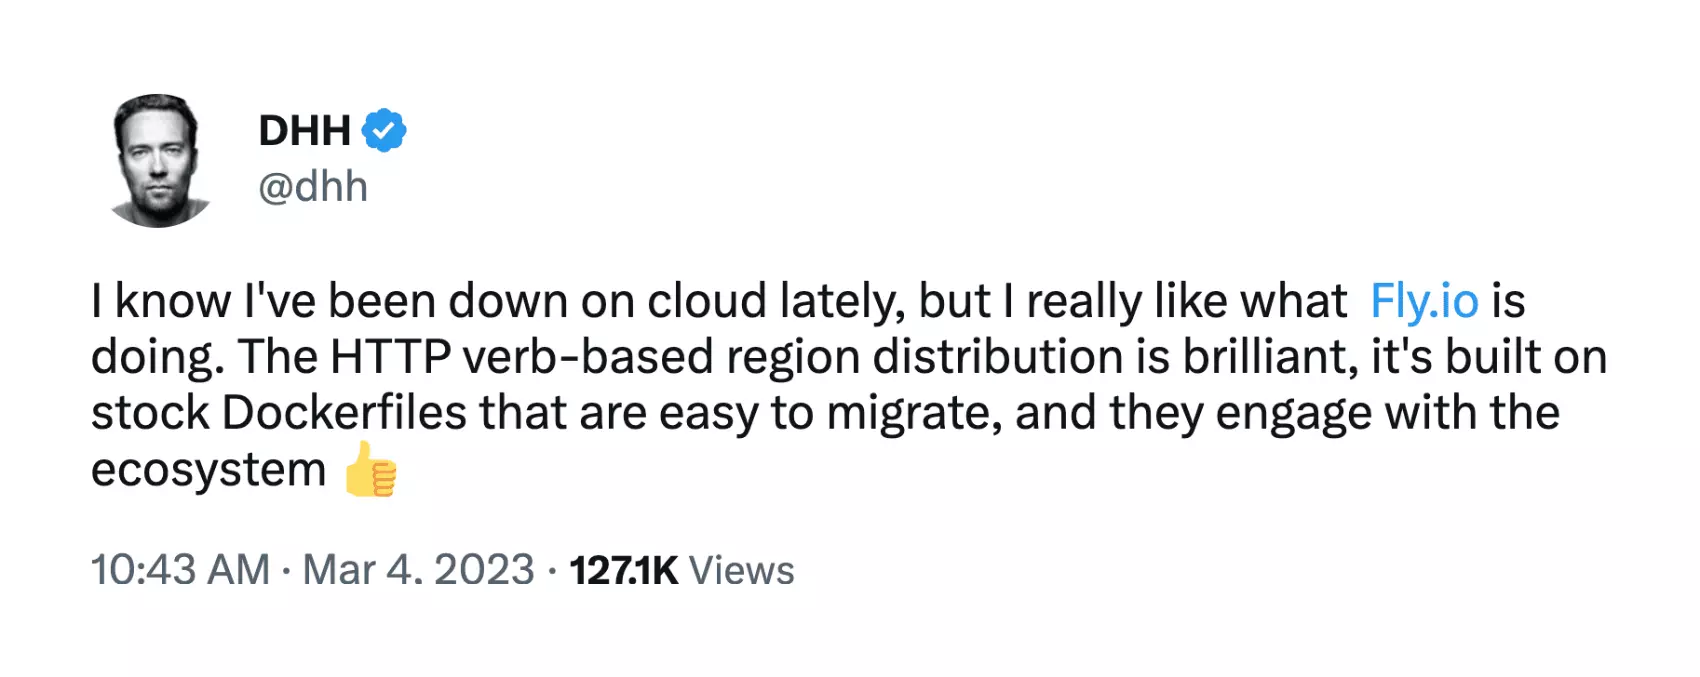 DHH on X: I know I've been down on cloud lately, but I really like what  http://Fly.io is doing. The HTTP verb-based region distribution is brilliant, it's built on stock Dockerfiles that are easy to migrate, and they engage with the ecosystem 👍